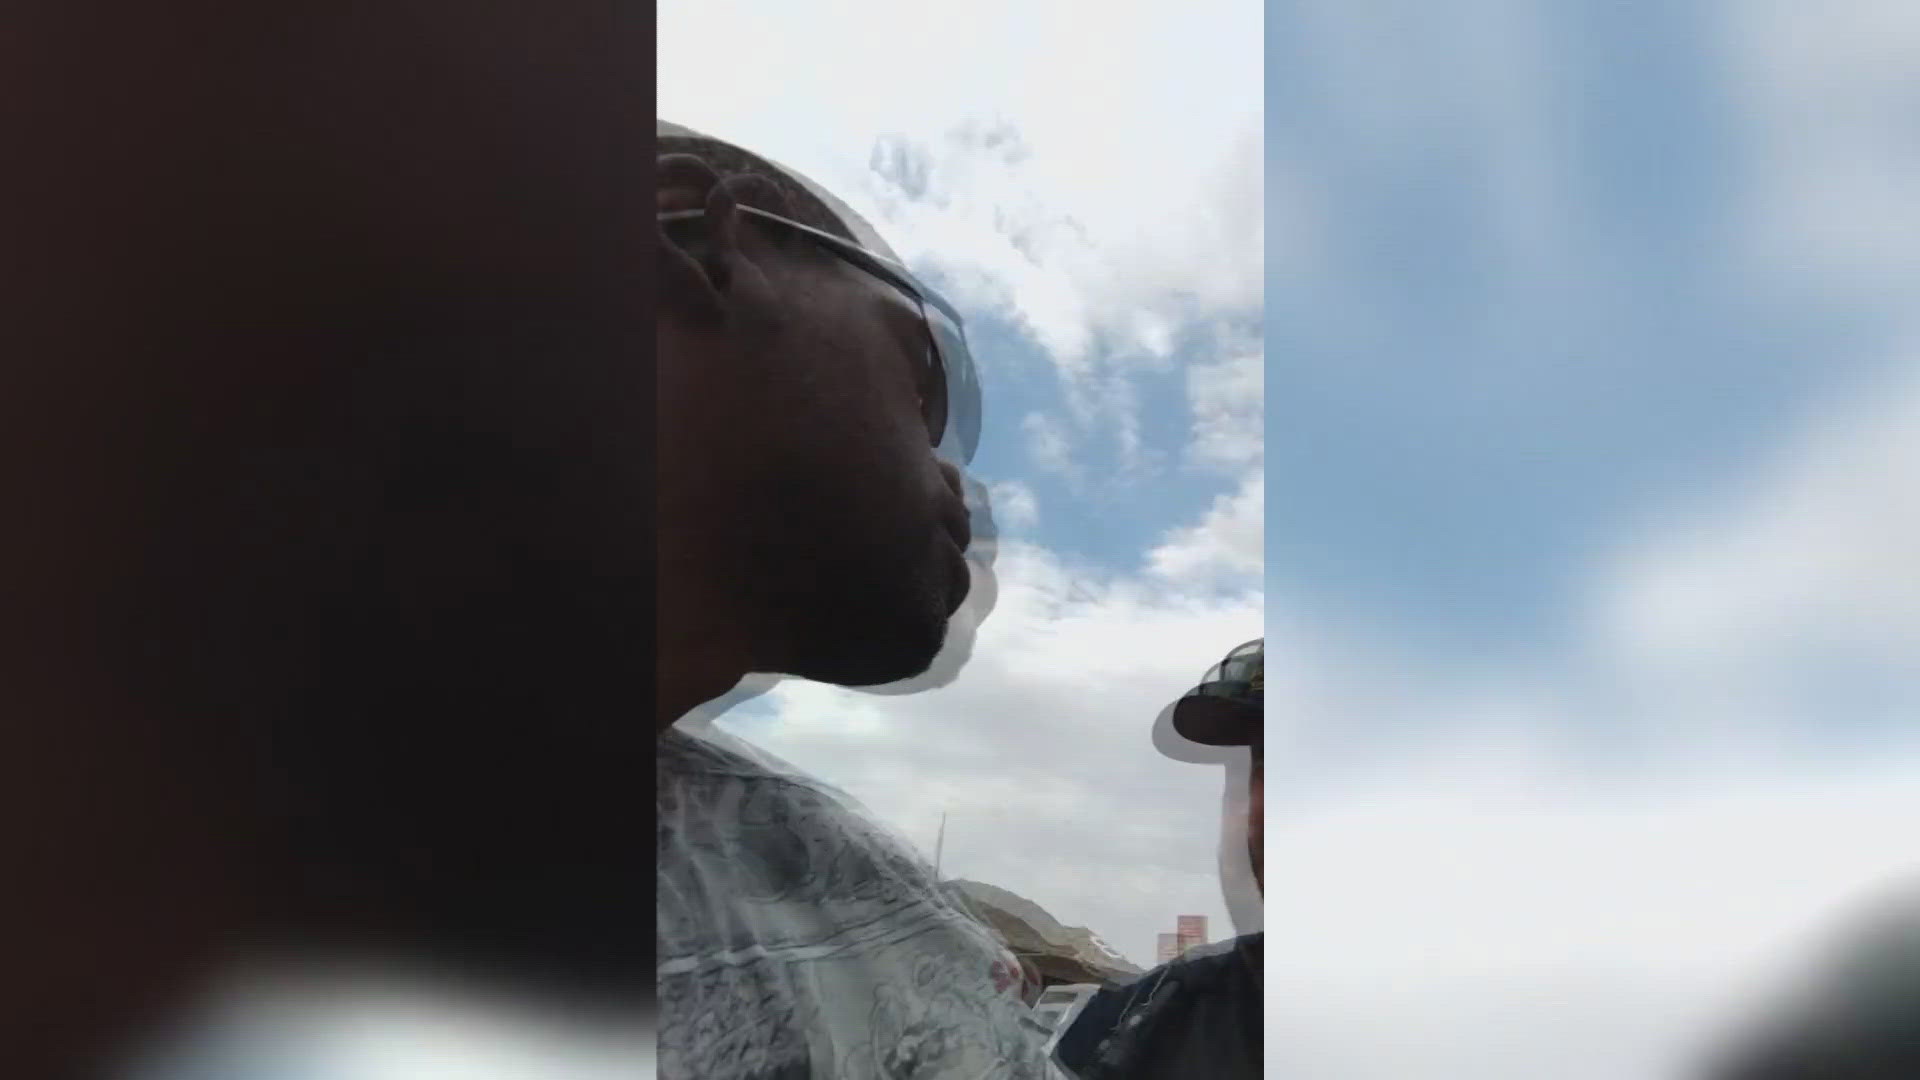 The man filmed an encounter with a Phoenix police officer that quickly escalated.